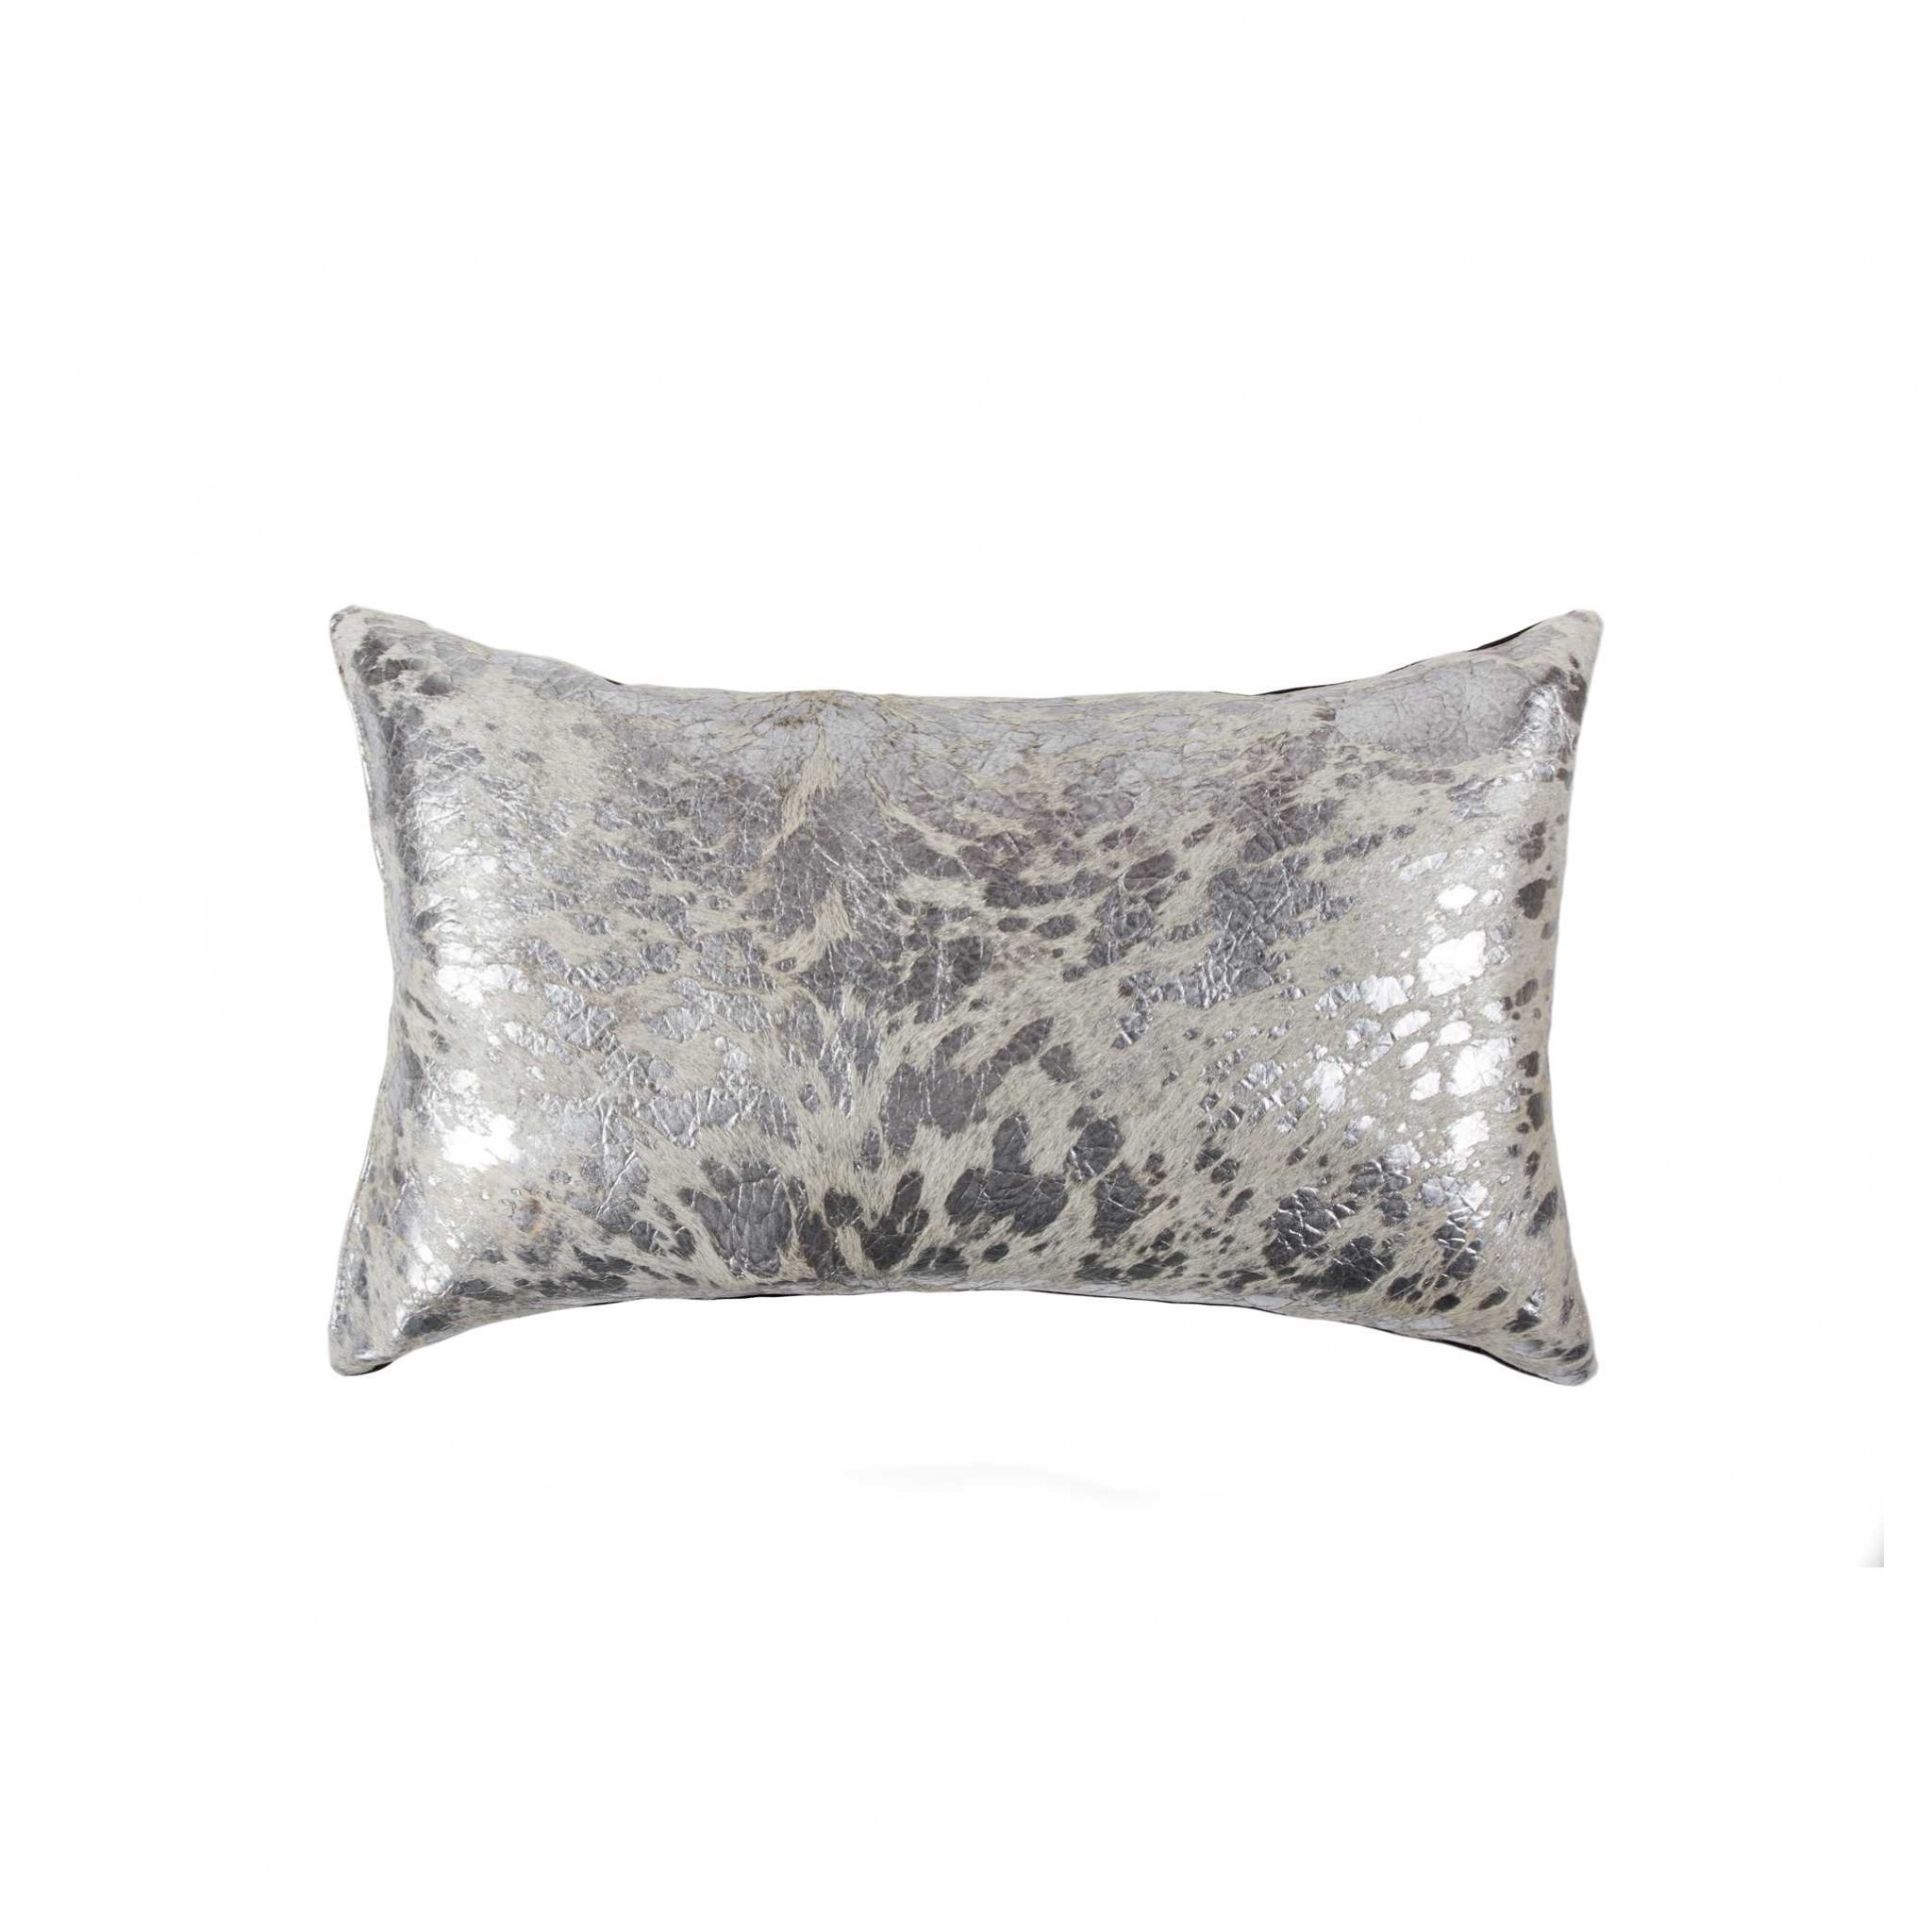 12" x 20" x 5" Silver And Natural Cowhide - Pillow